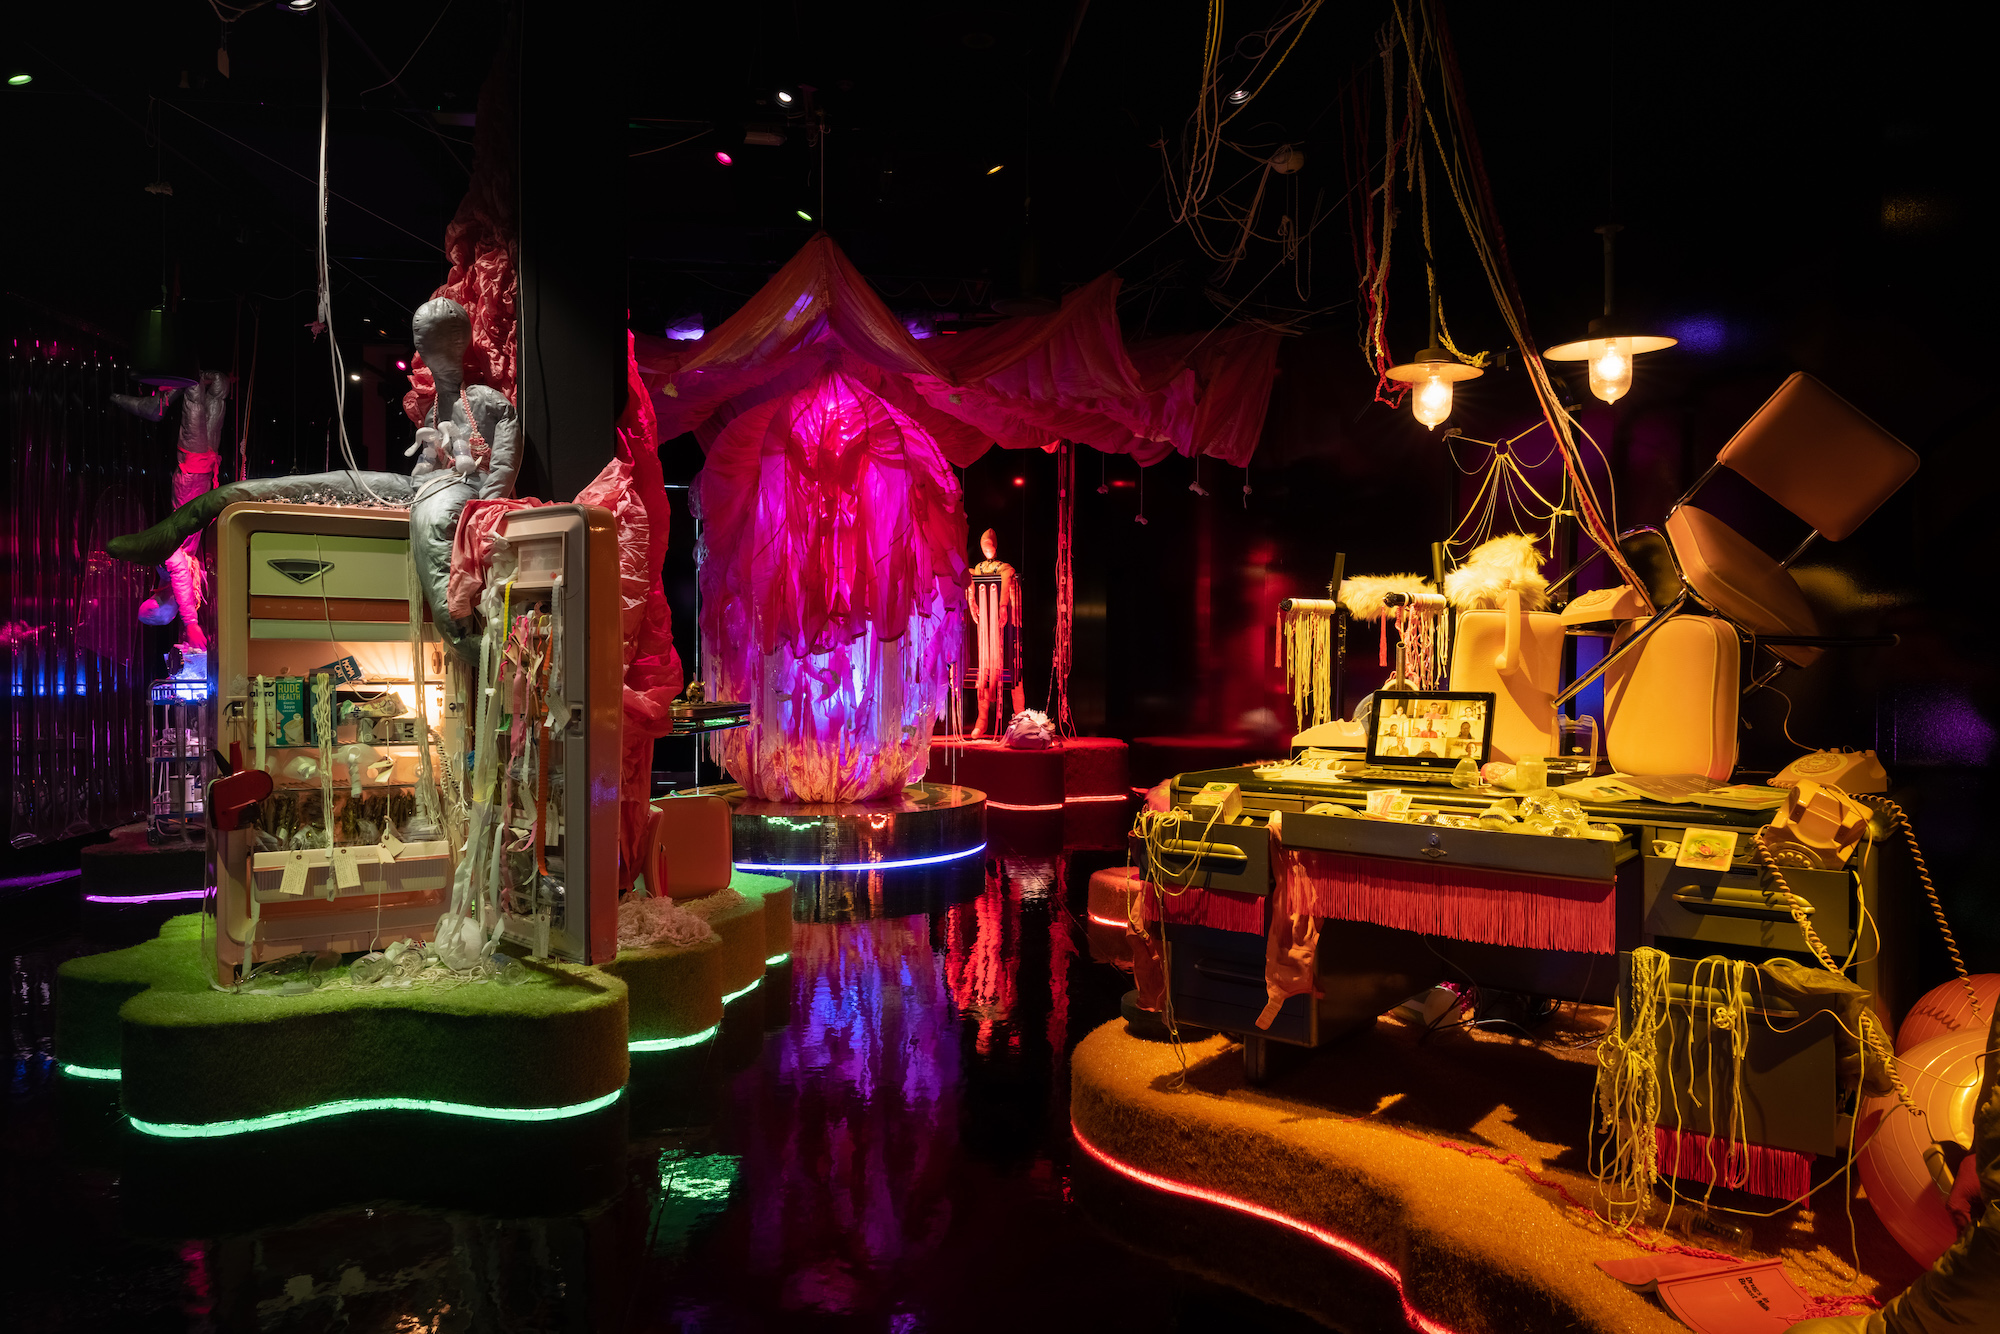 A dark room is lit up with various colorful installations with tassles, fabric and objects spilling out of fridges and a desk; a pink amorphous shape made of fabric hangs in the background.